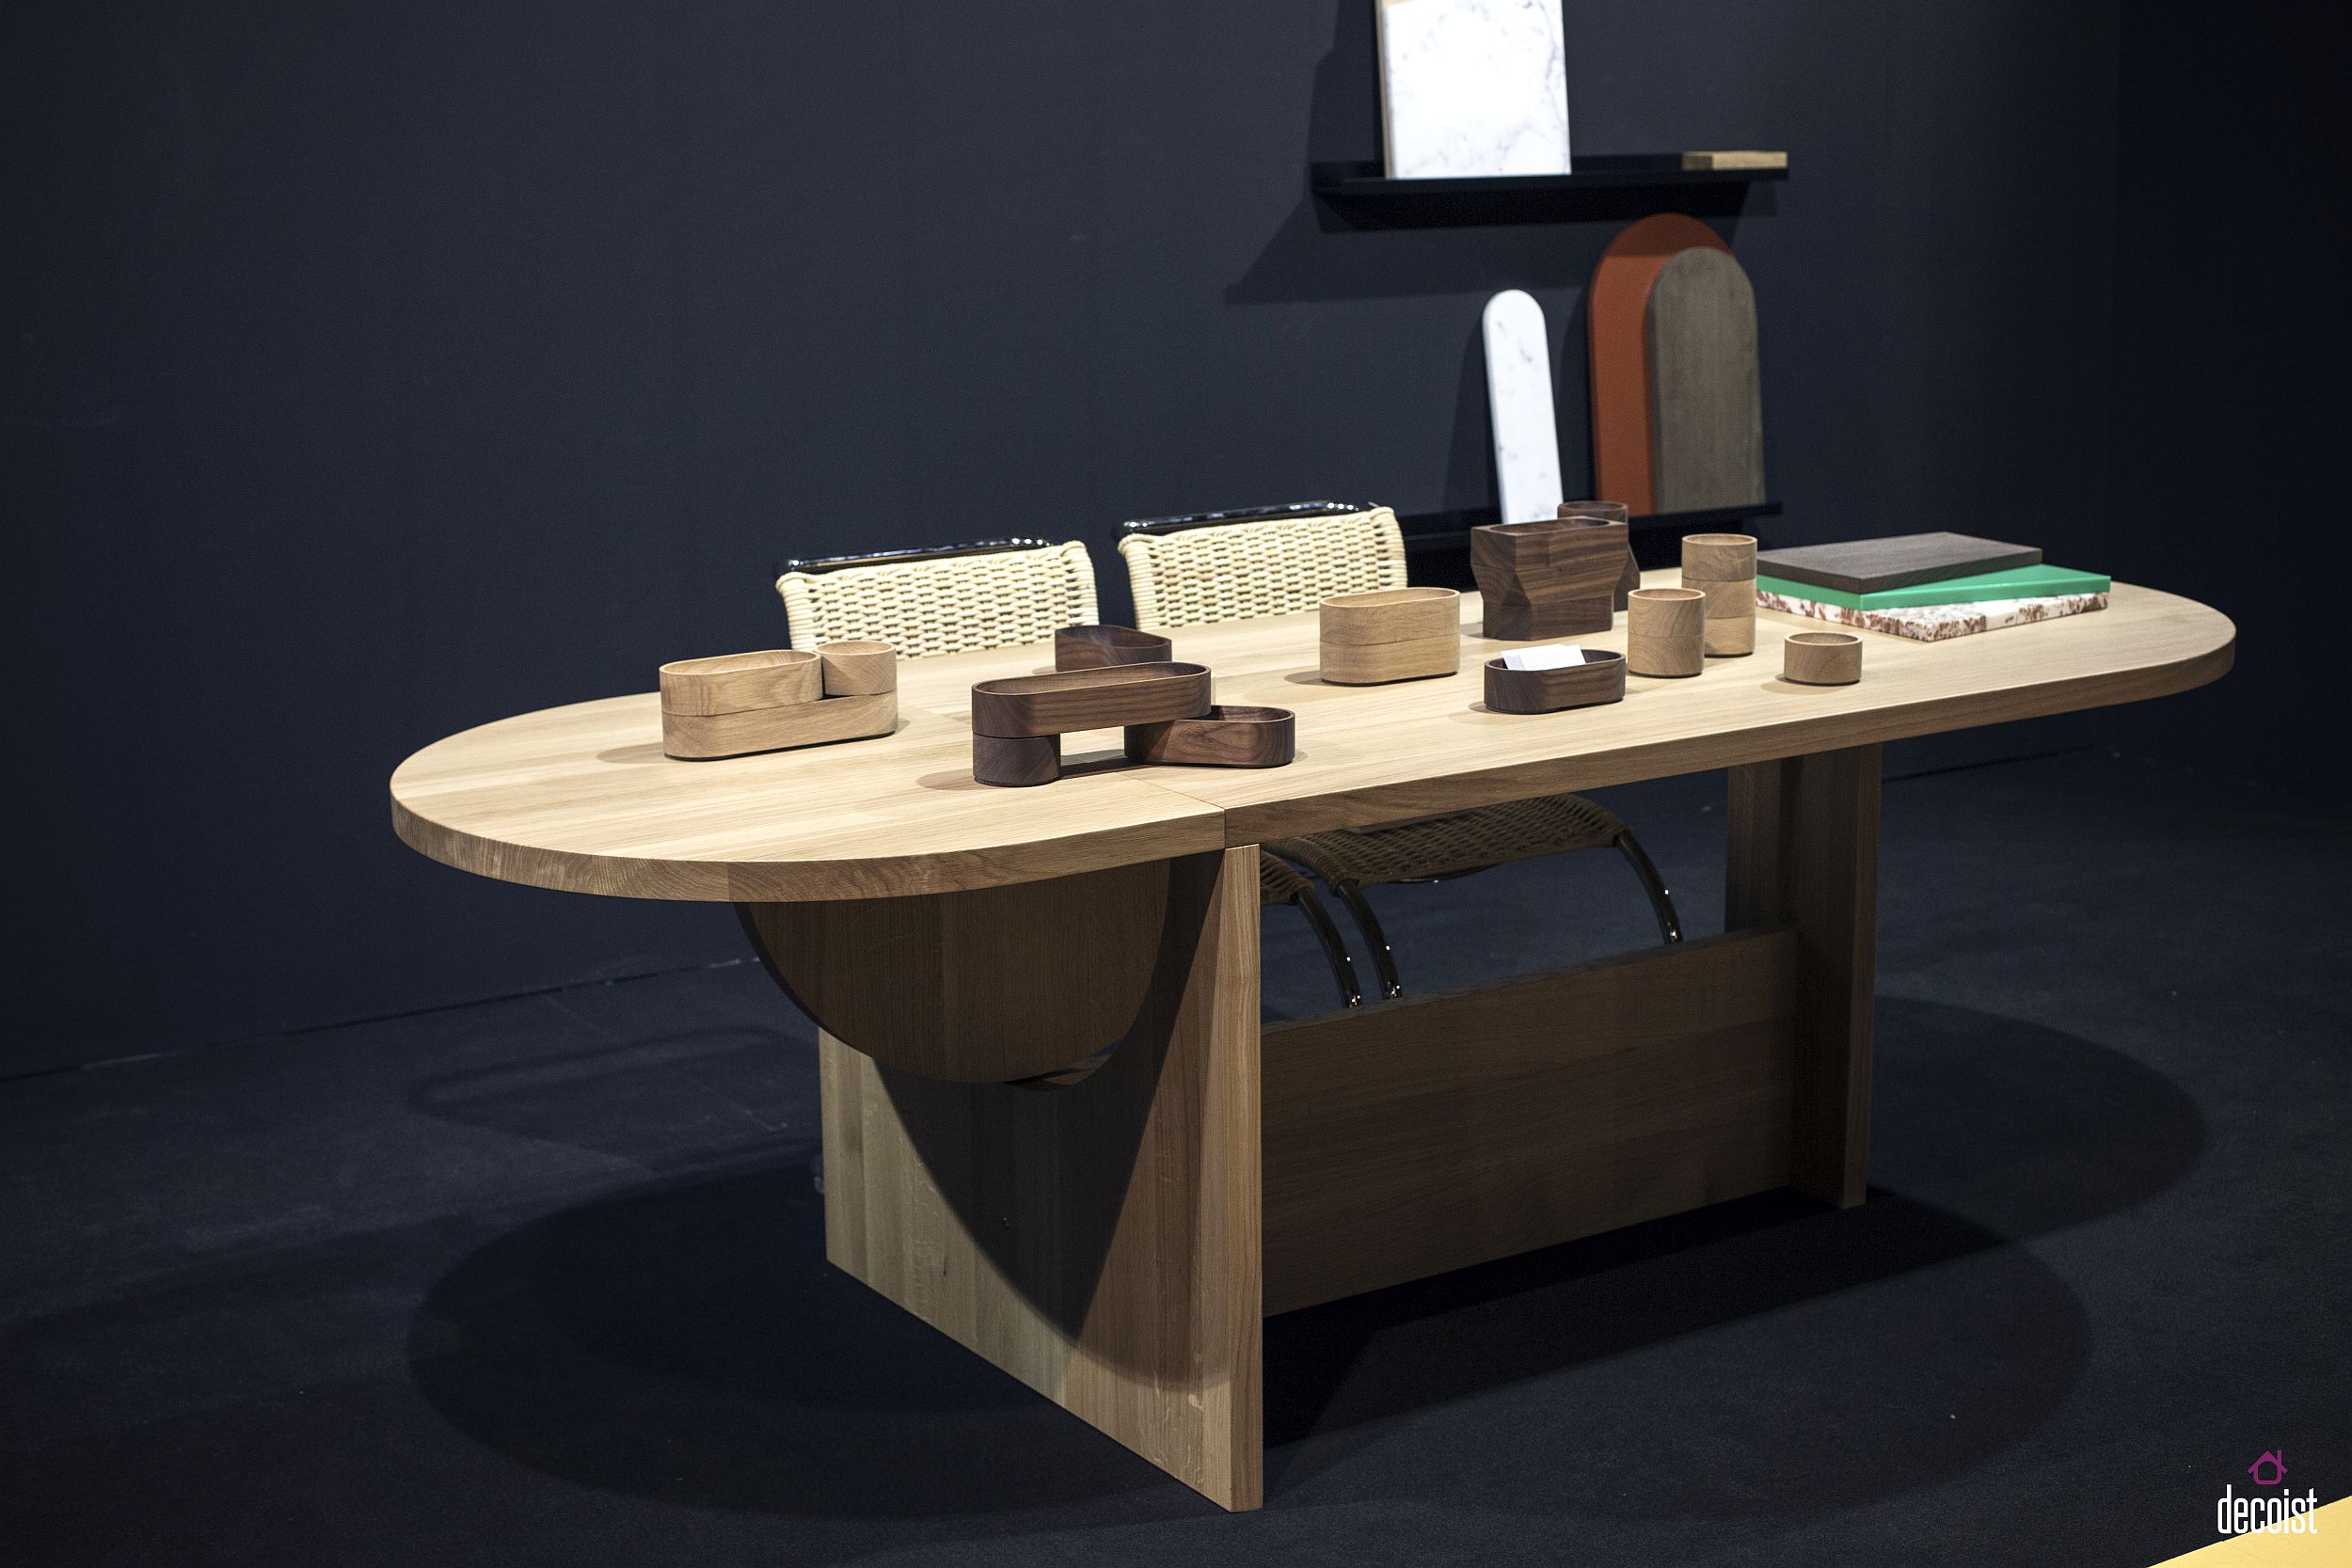 Wooden-work-table-adds-both-textural-and-geometric-contrast-to-the-home-office